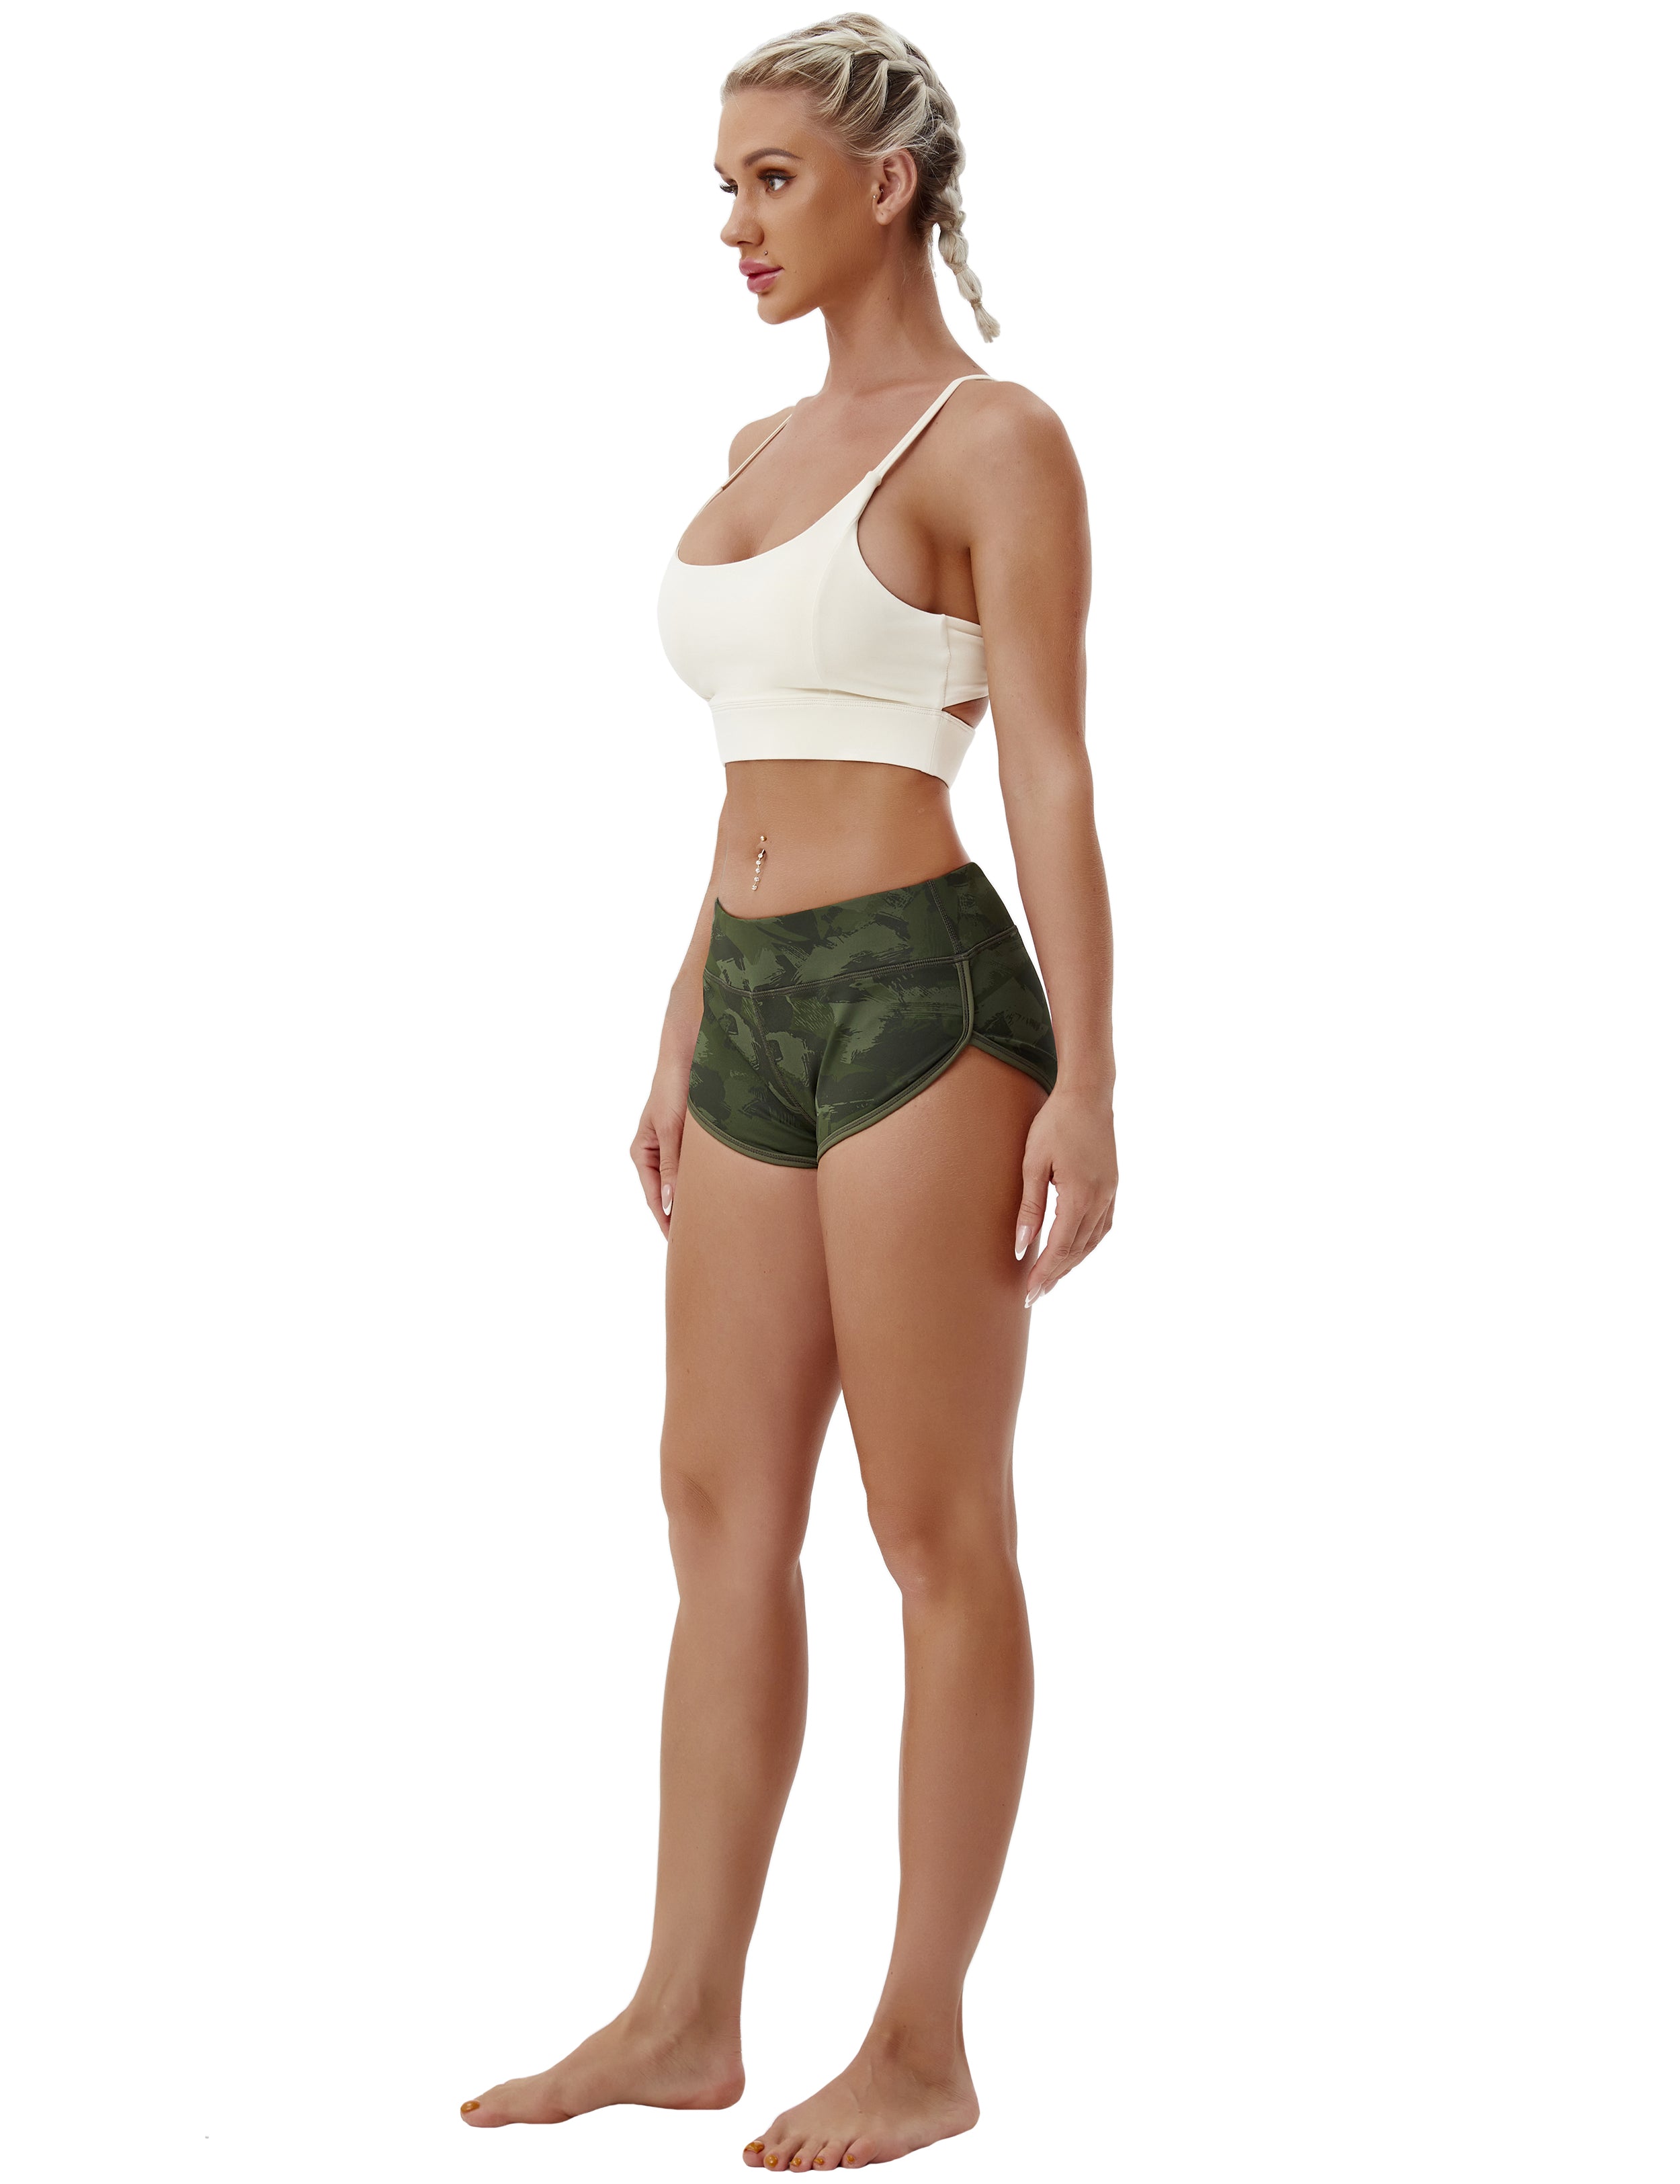 Printed Booty Pilates Shorts green brushcamo Sleek, soft, smooth and totally comfortable: our newest sexy style is here. Softest-ever fabric High elasticity High density 4-way stretch Fabric doesn't attract lint easily No see-through Moisture-wicking Machine wash 78% Polyester, 22% Spandex